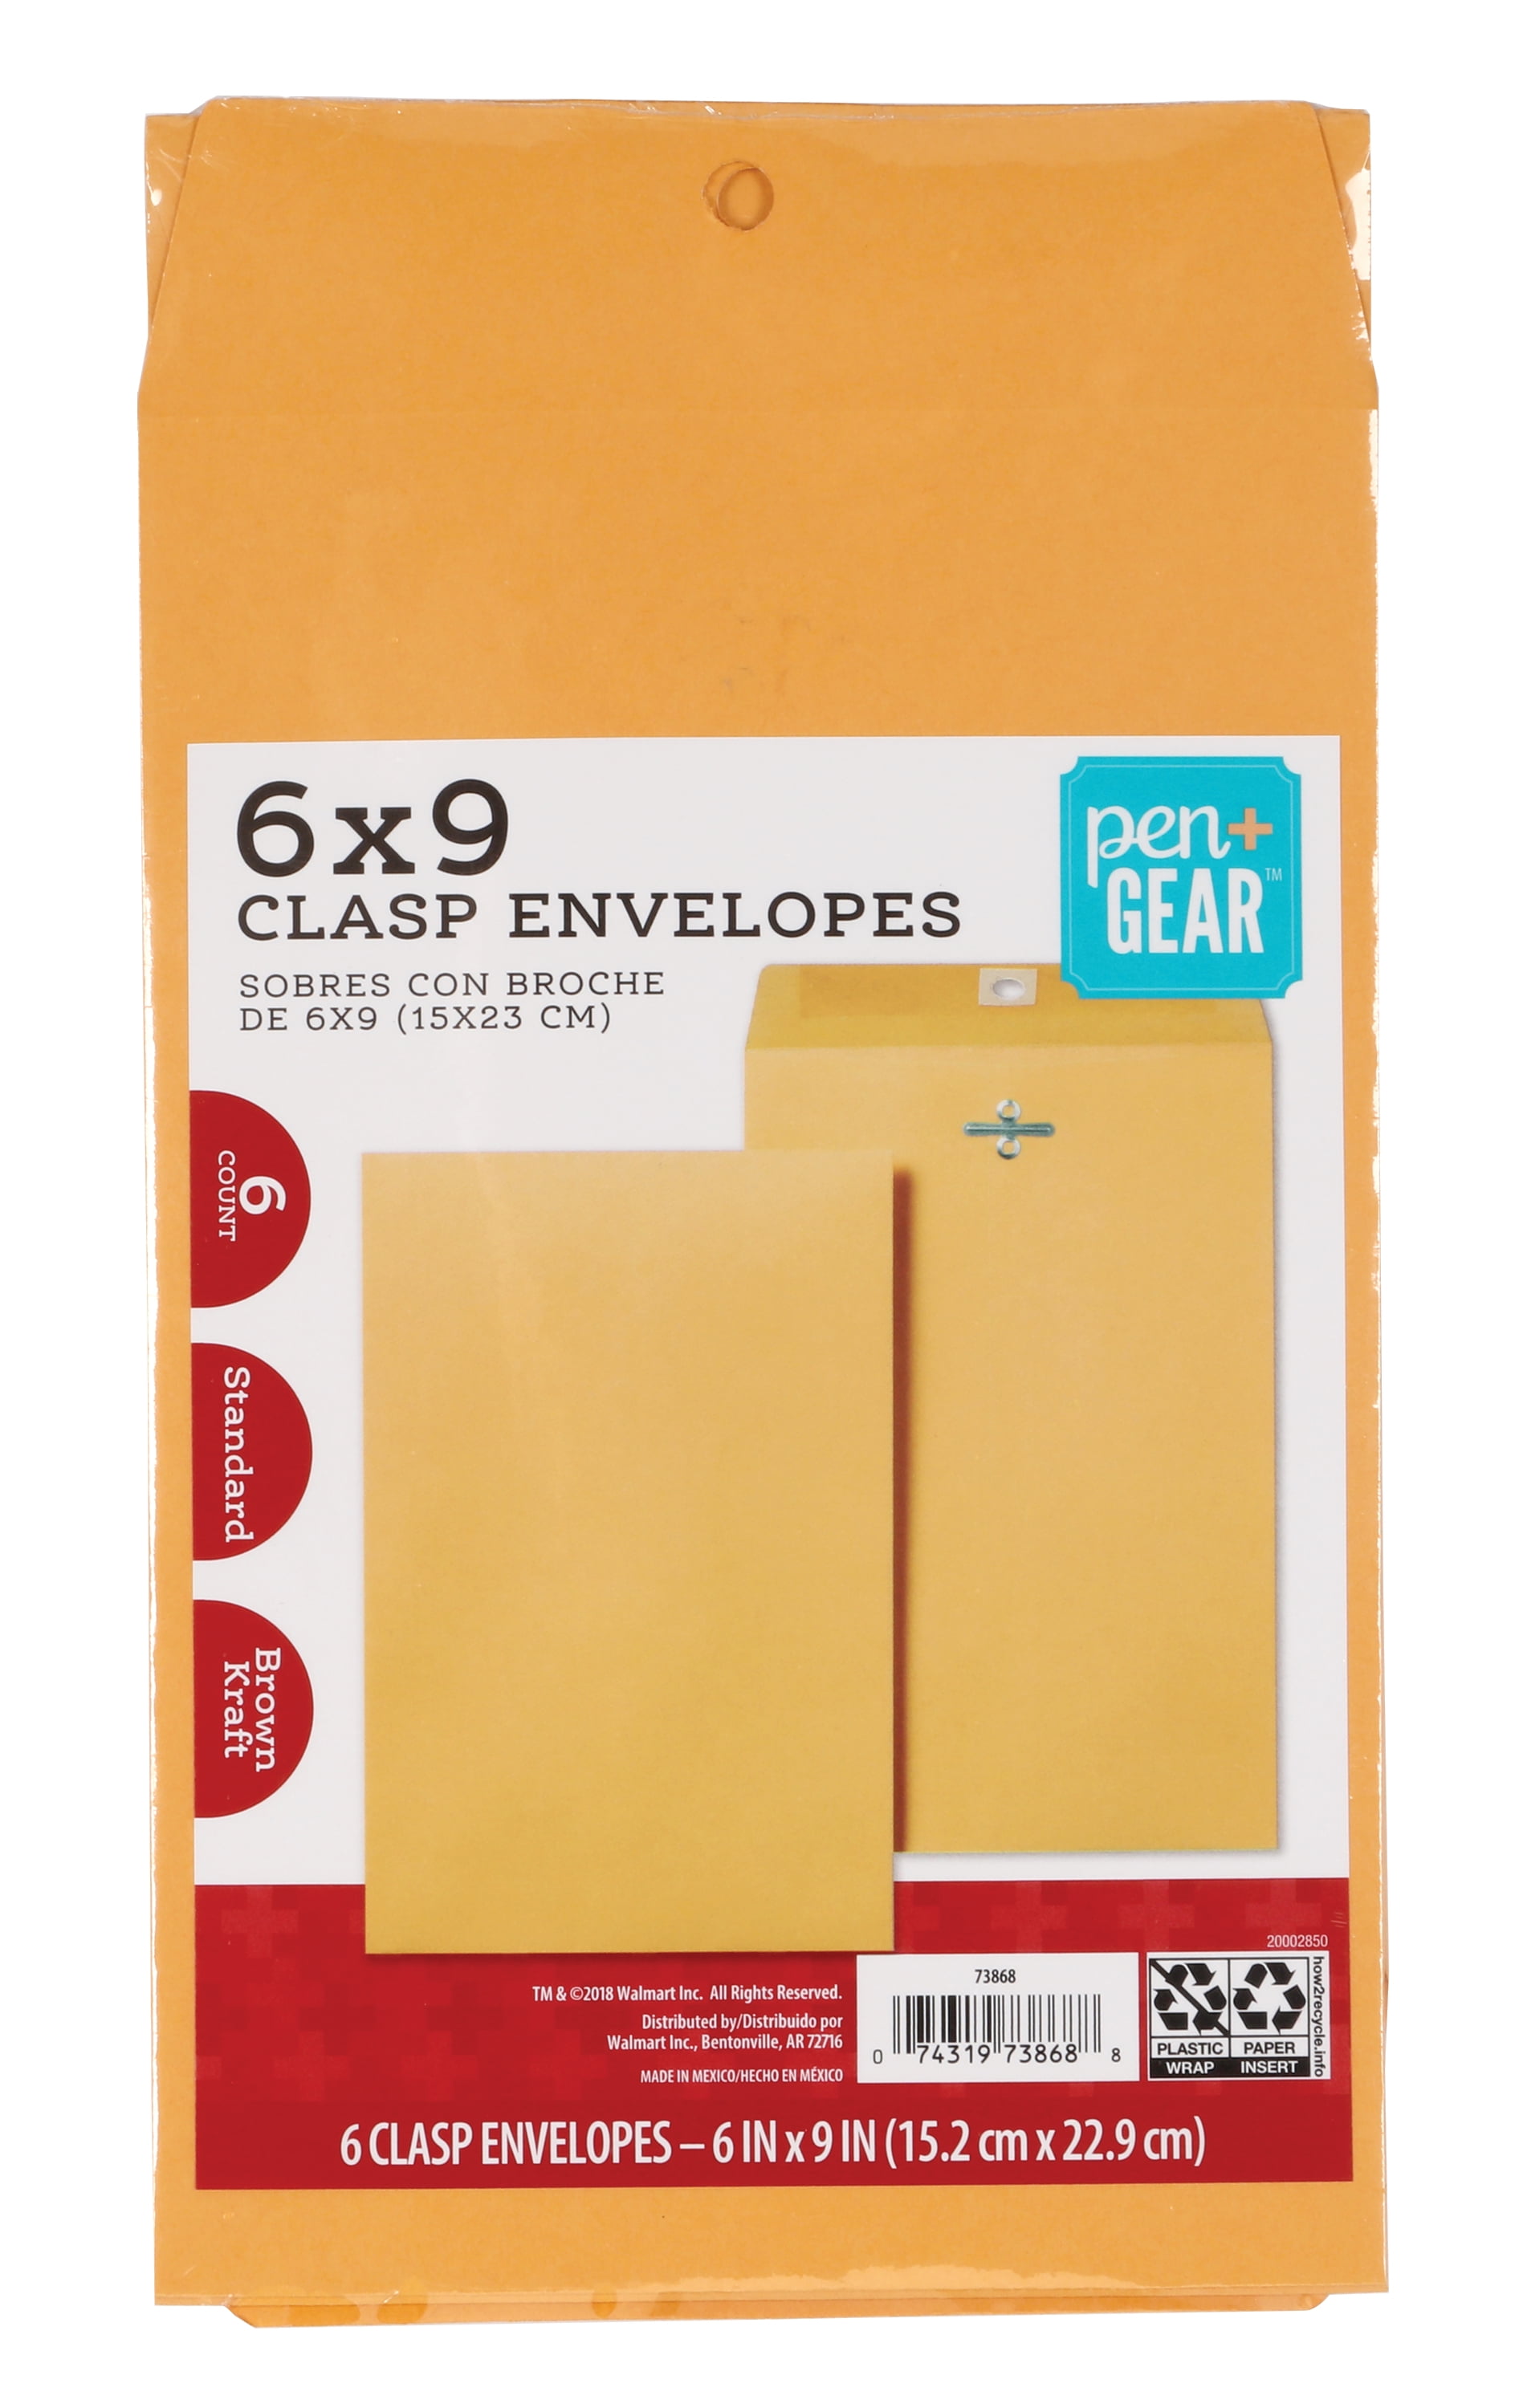 MEAD 040655 #55 CLASP ENVELOPE 6X9 28LB BROWN KRAFT BOX OF 400 COUNT 